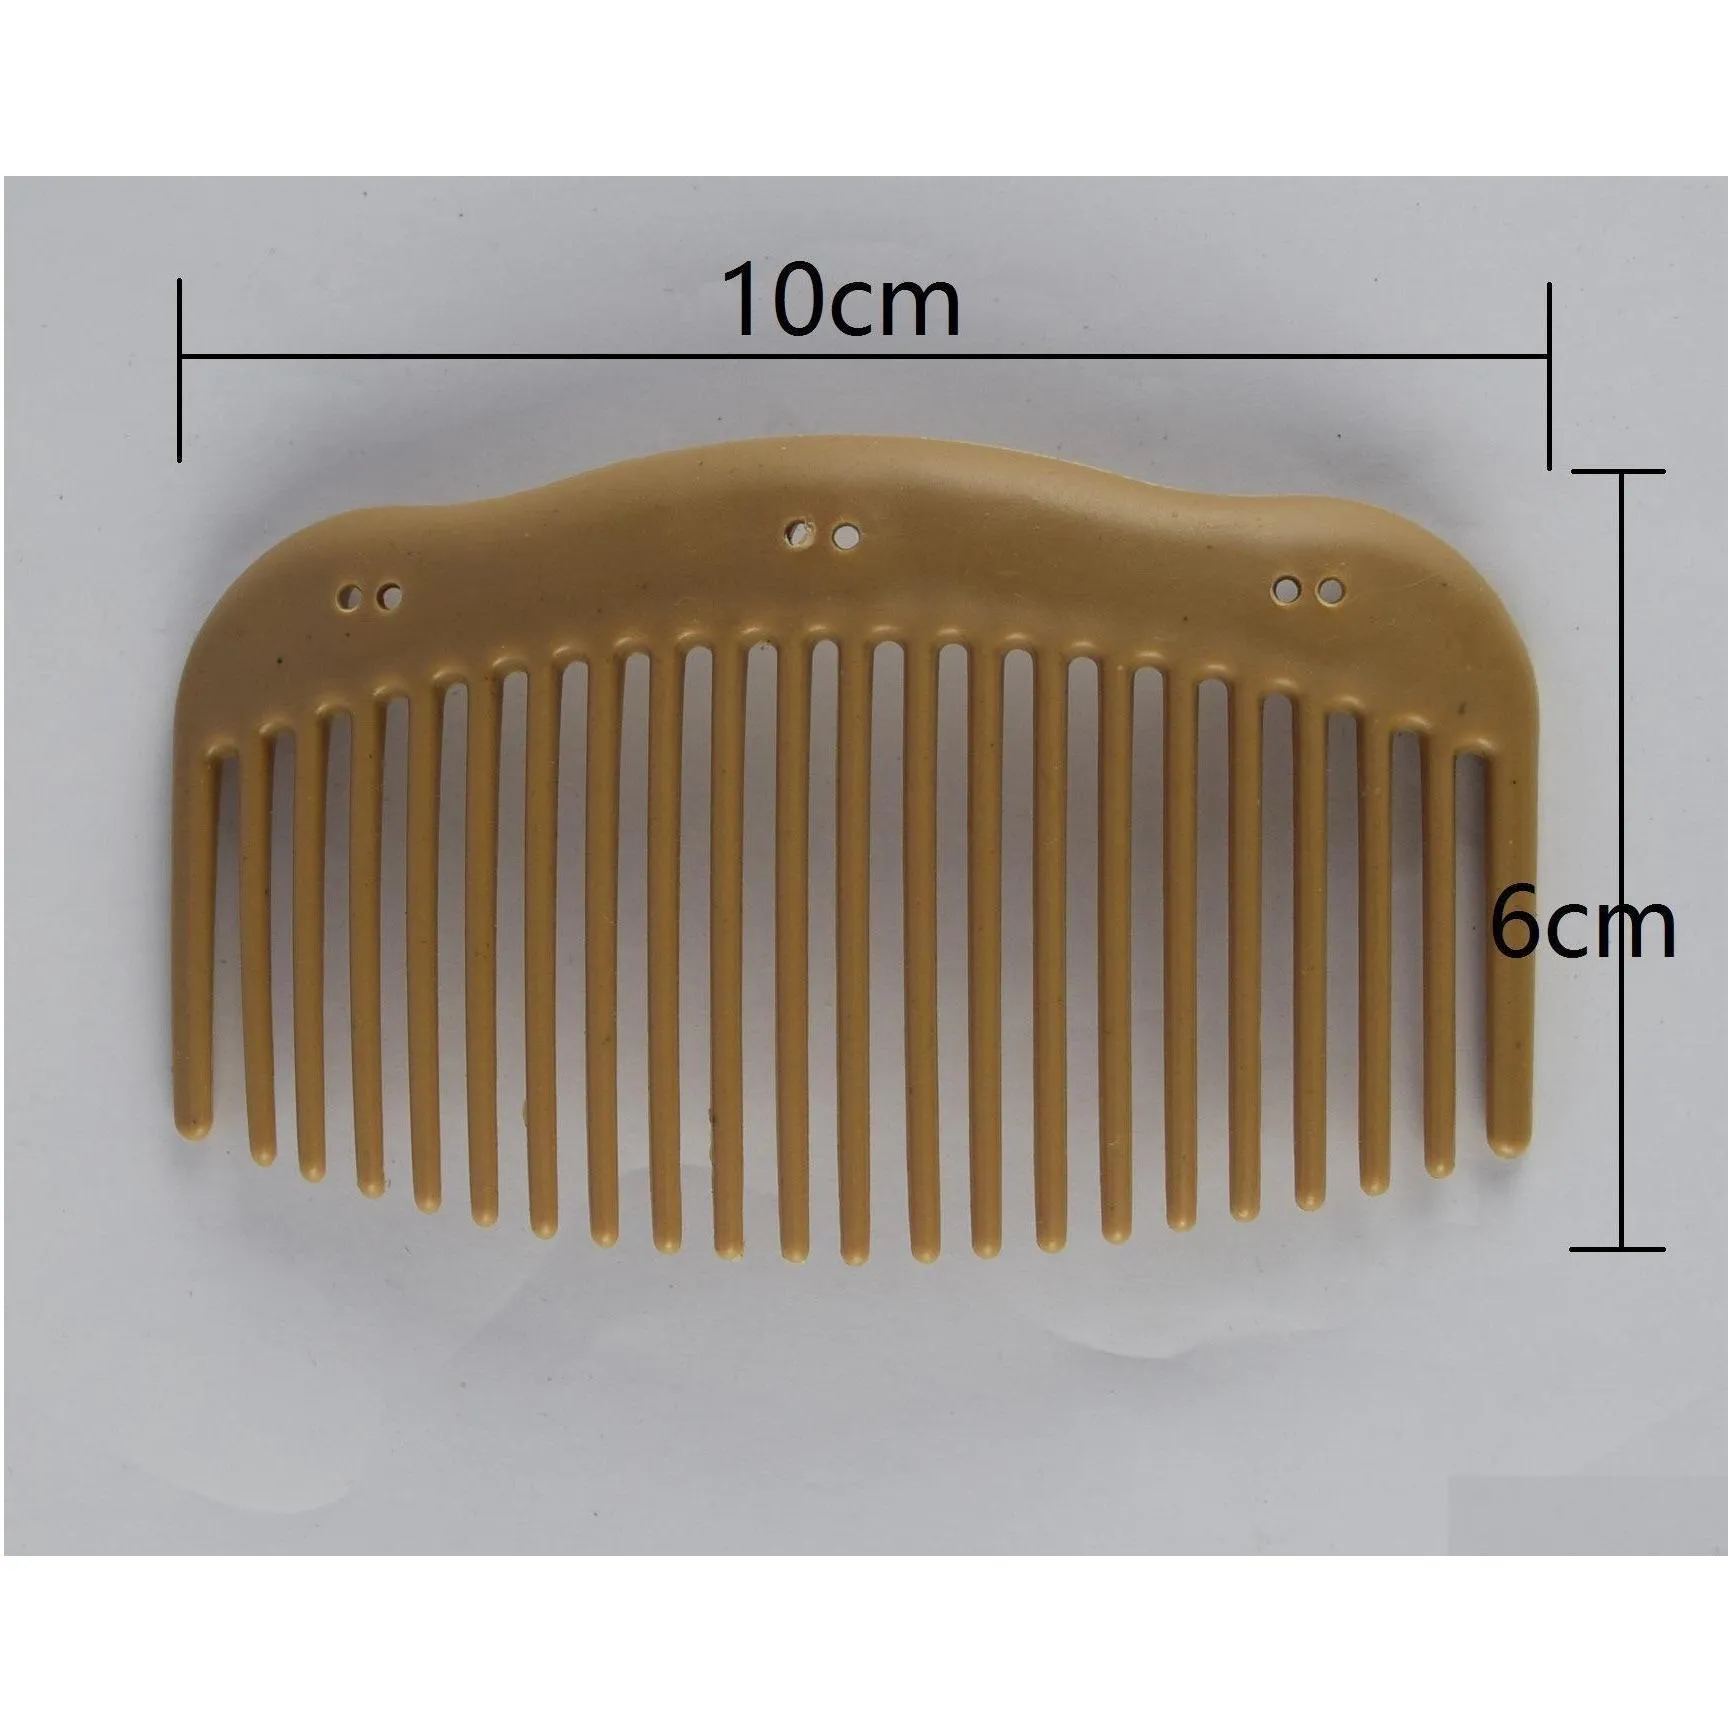 new diy magic combs womens wooden style plastic multifunctional hair combs geometry headwear hair accessories size m l100pcs per lot